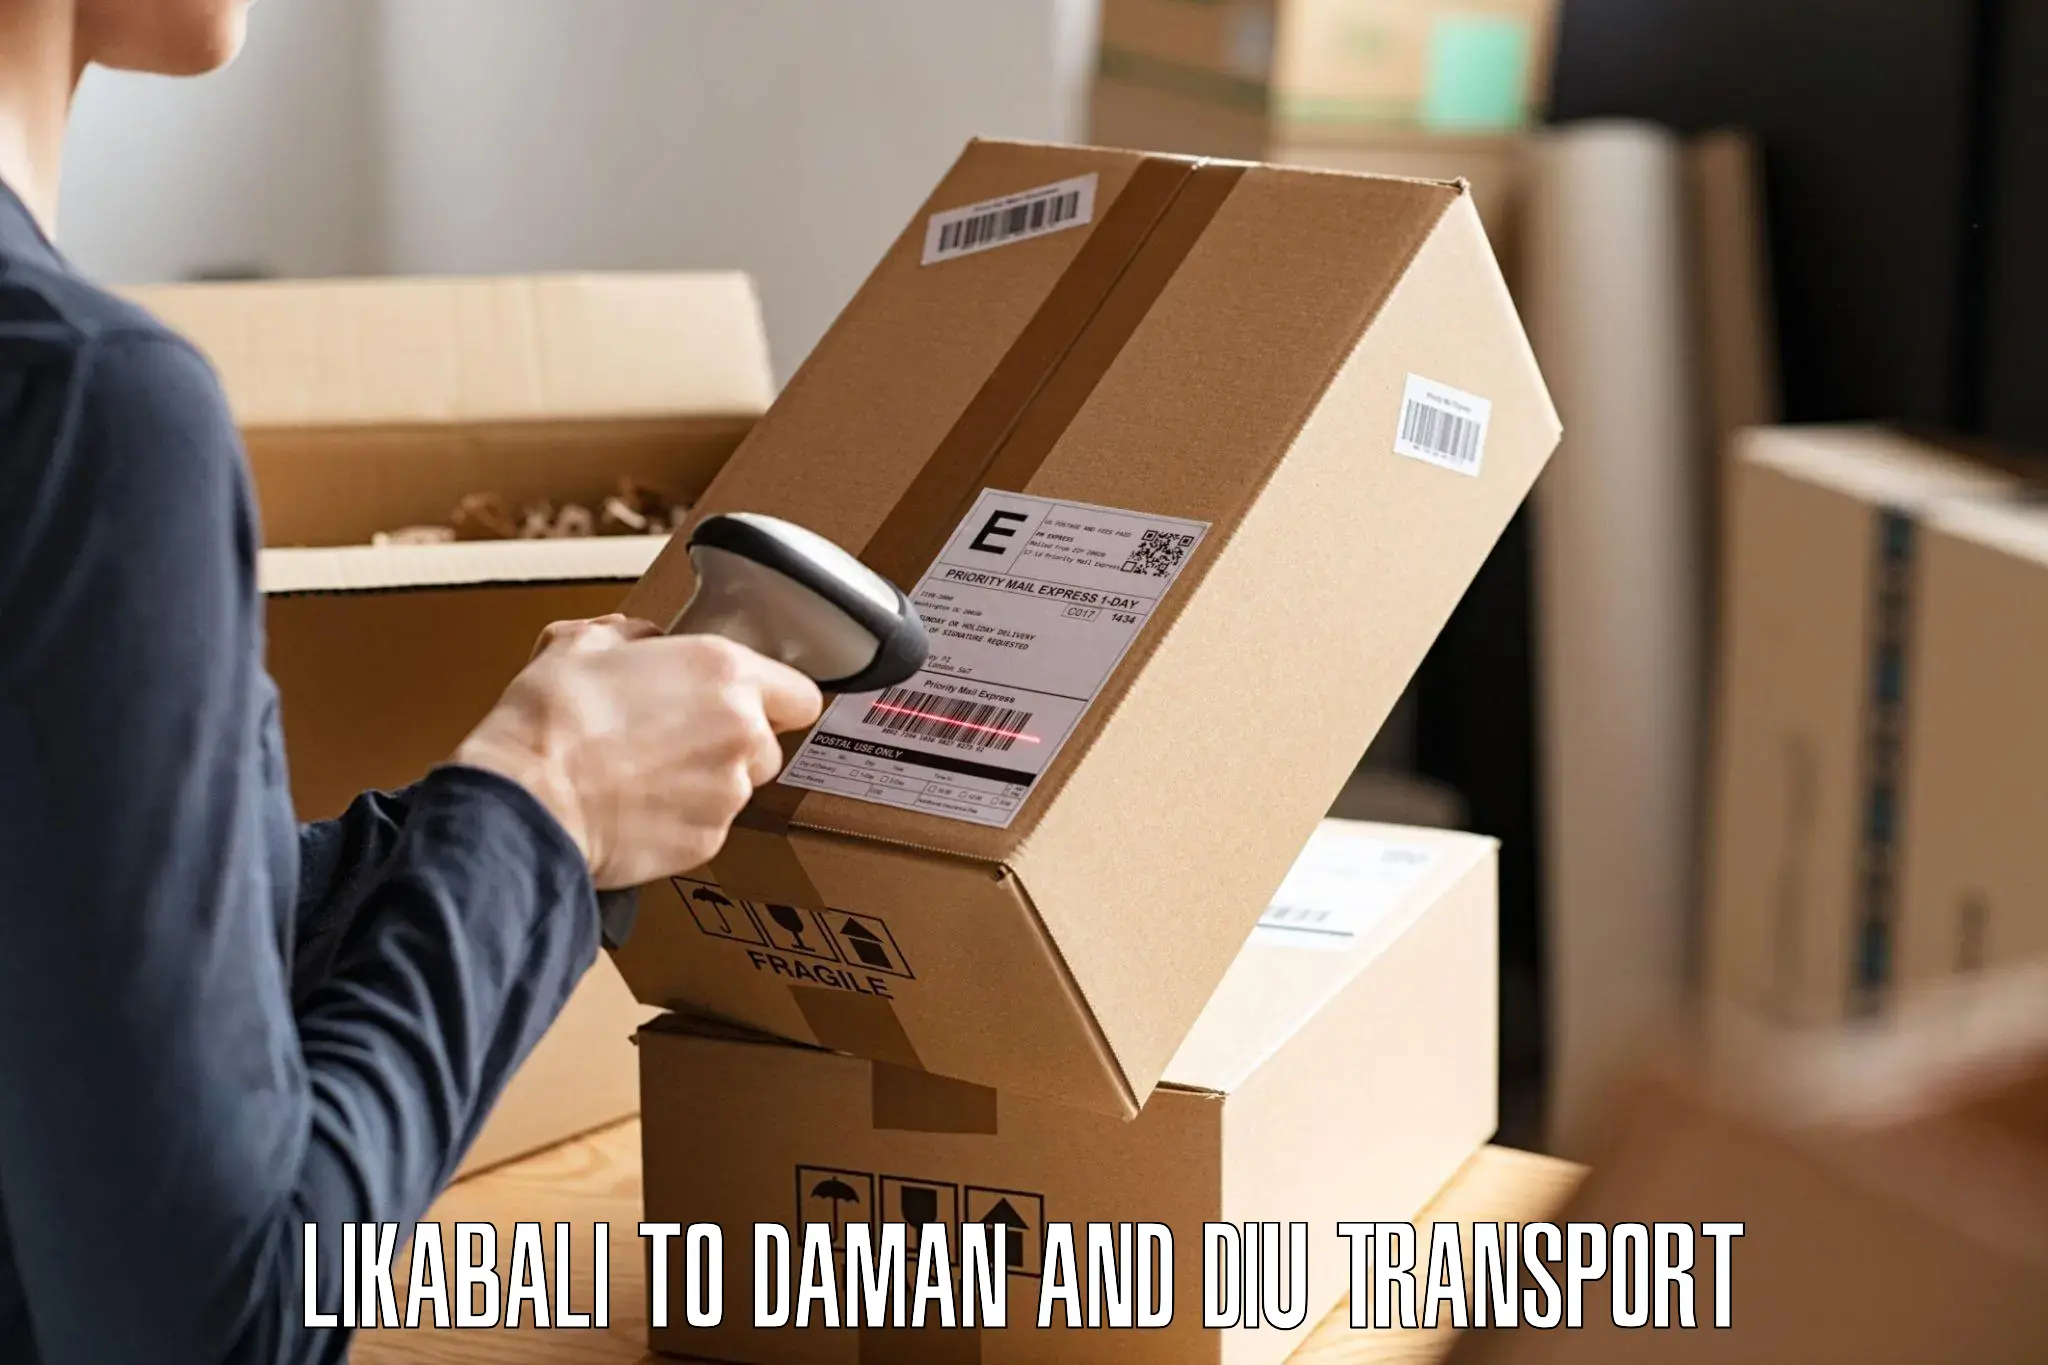 Road transport online services Likabali to Daman and Diu